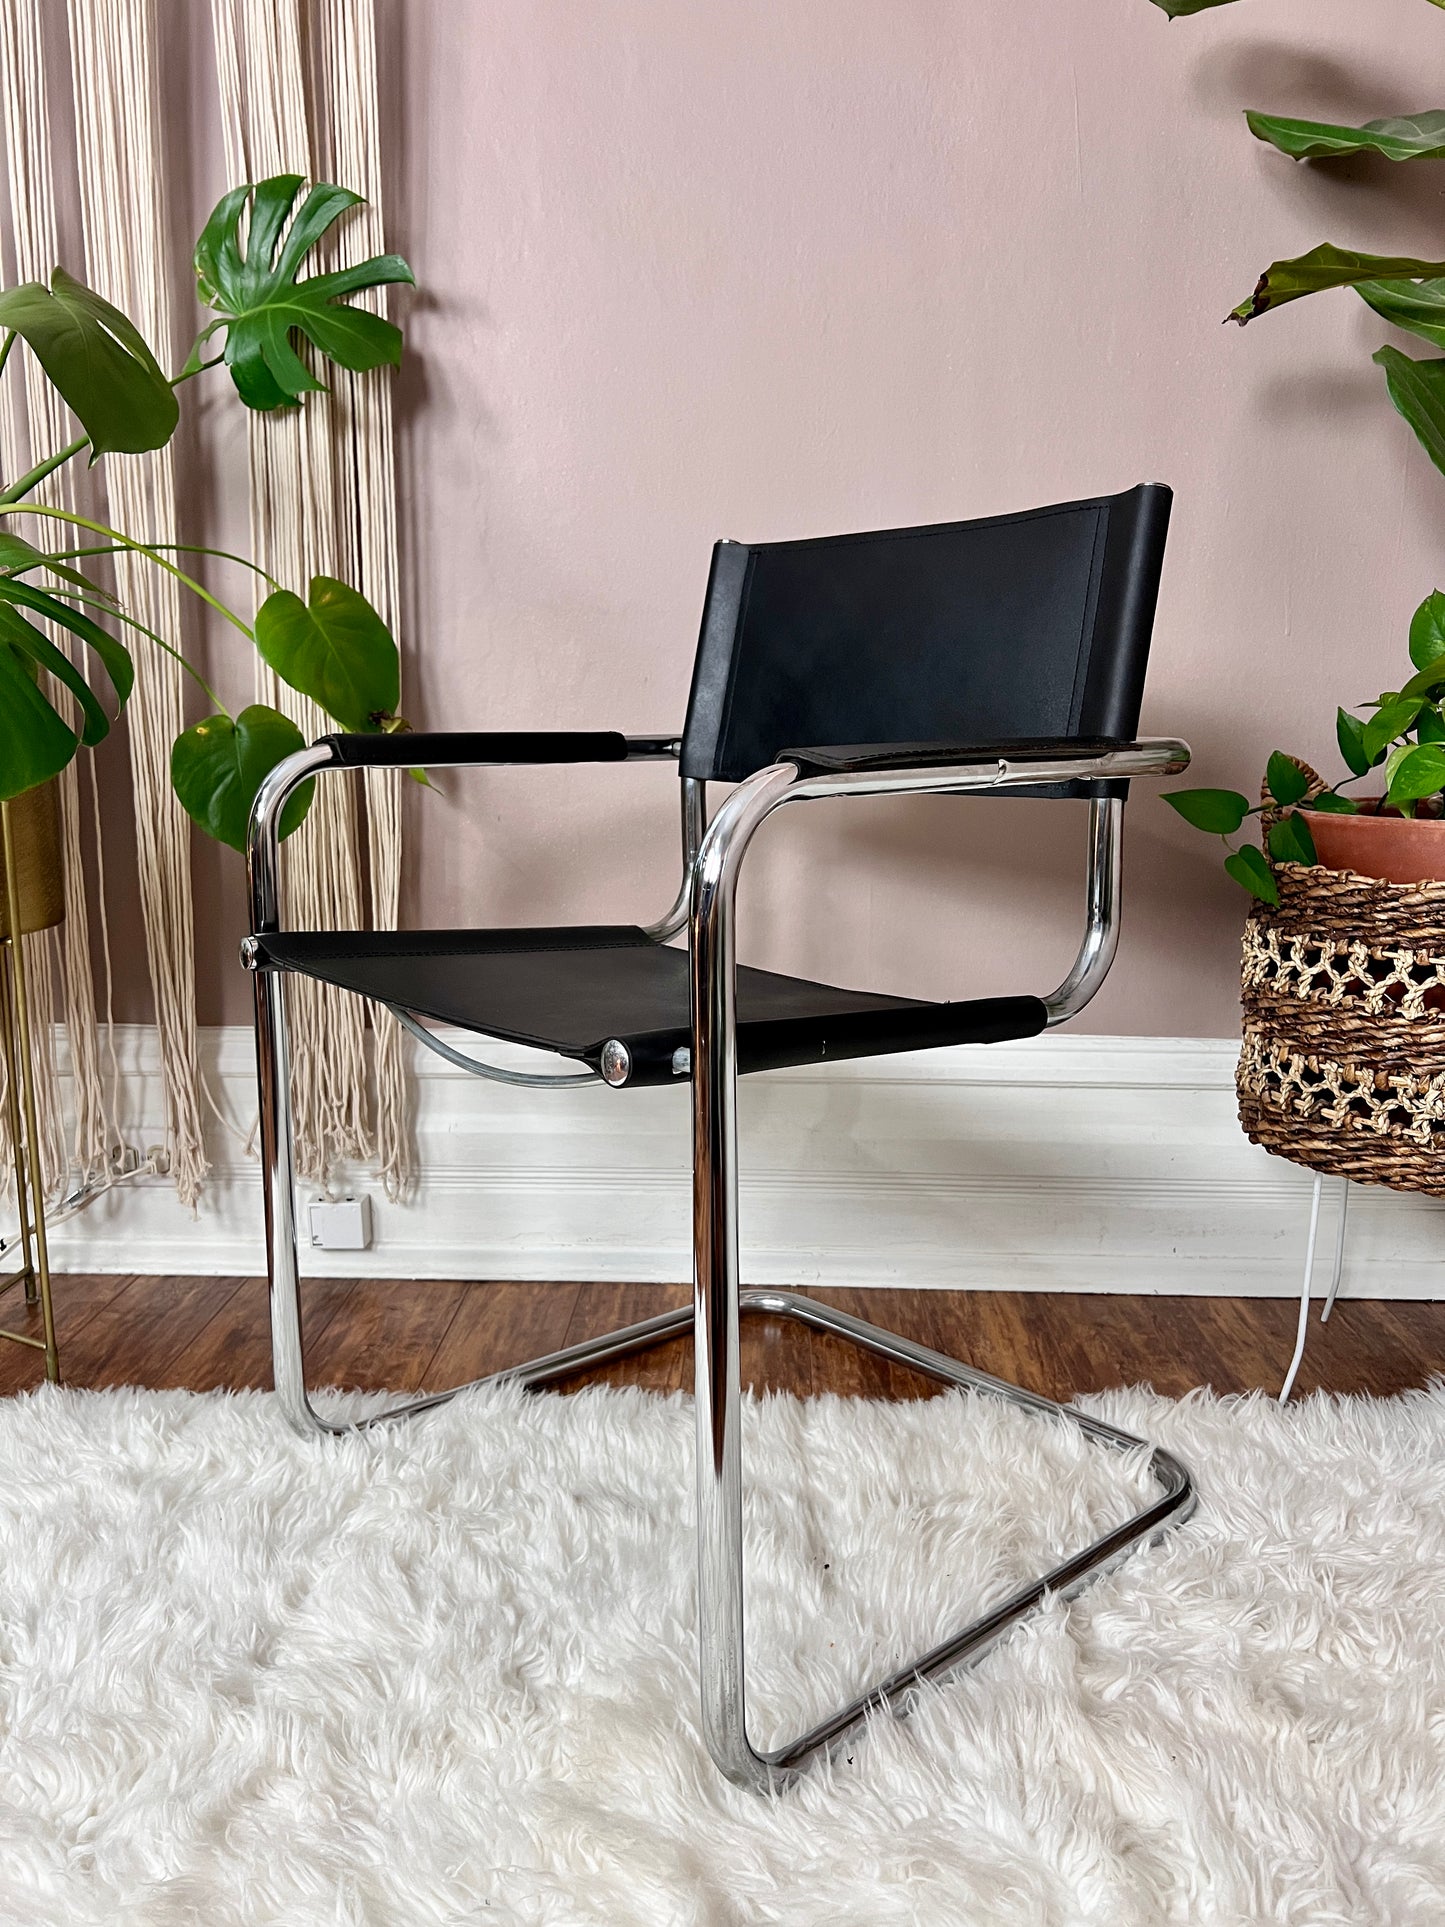 The Mart Stam S34 Chair